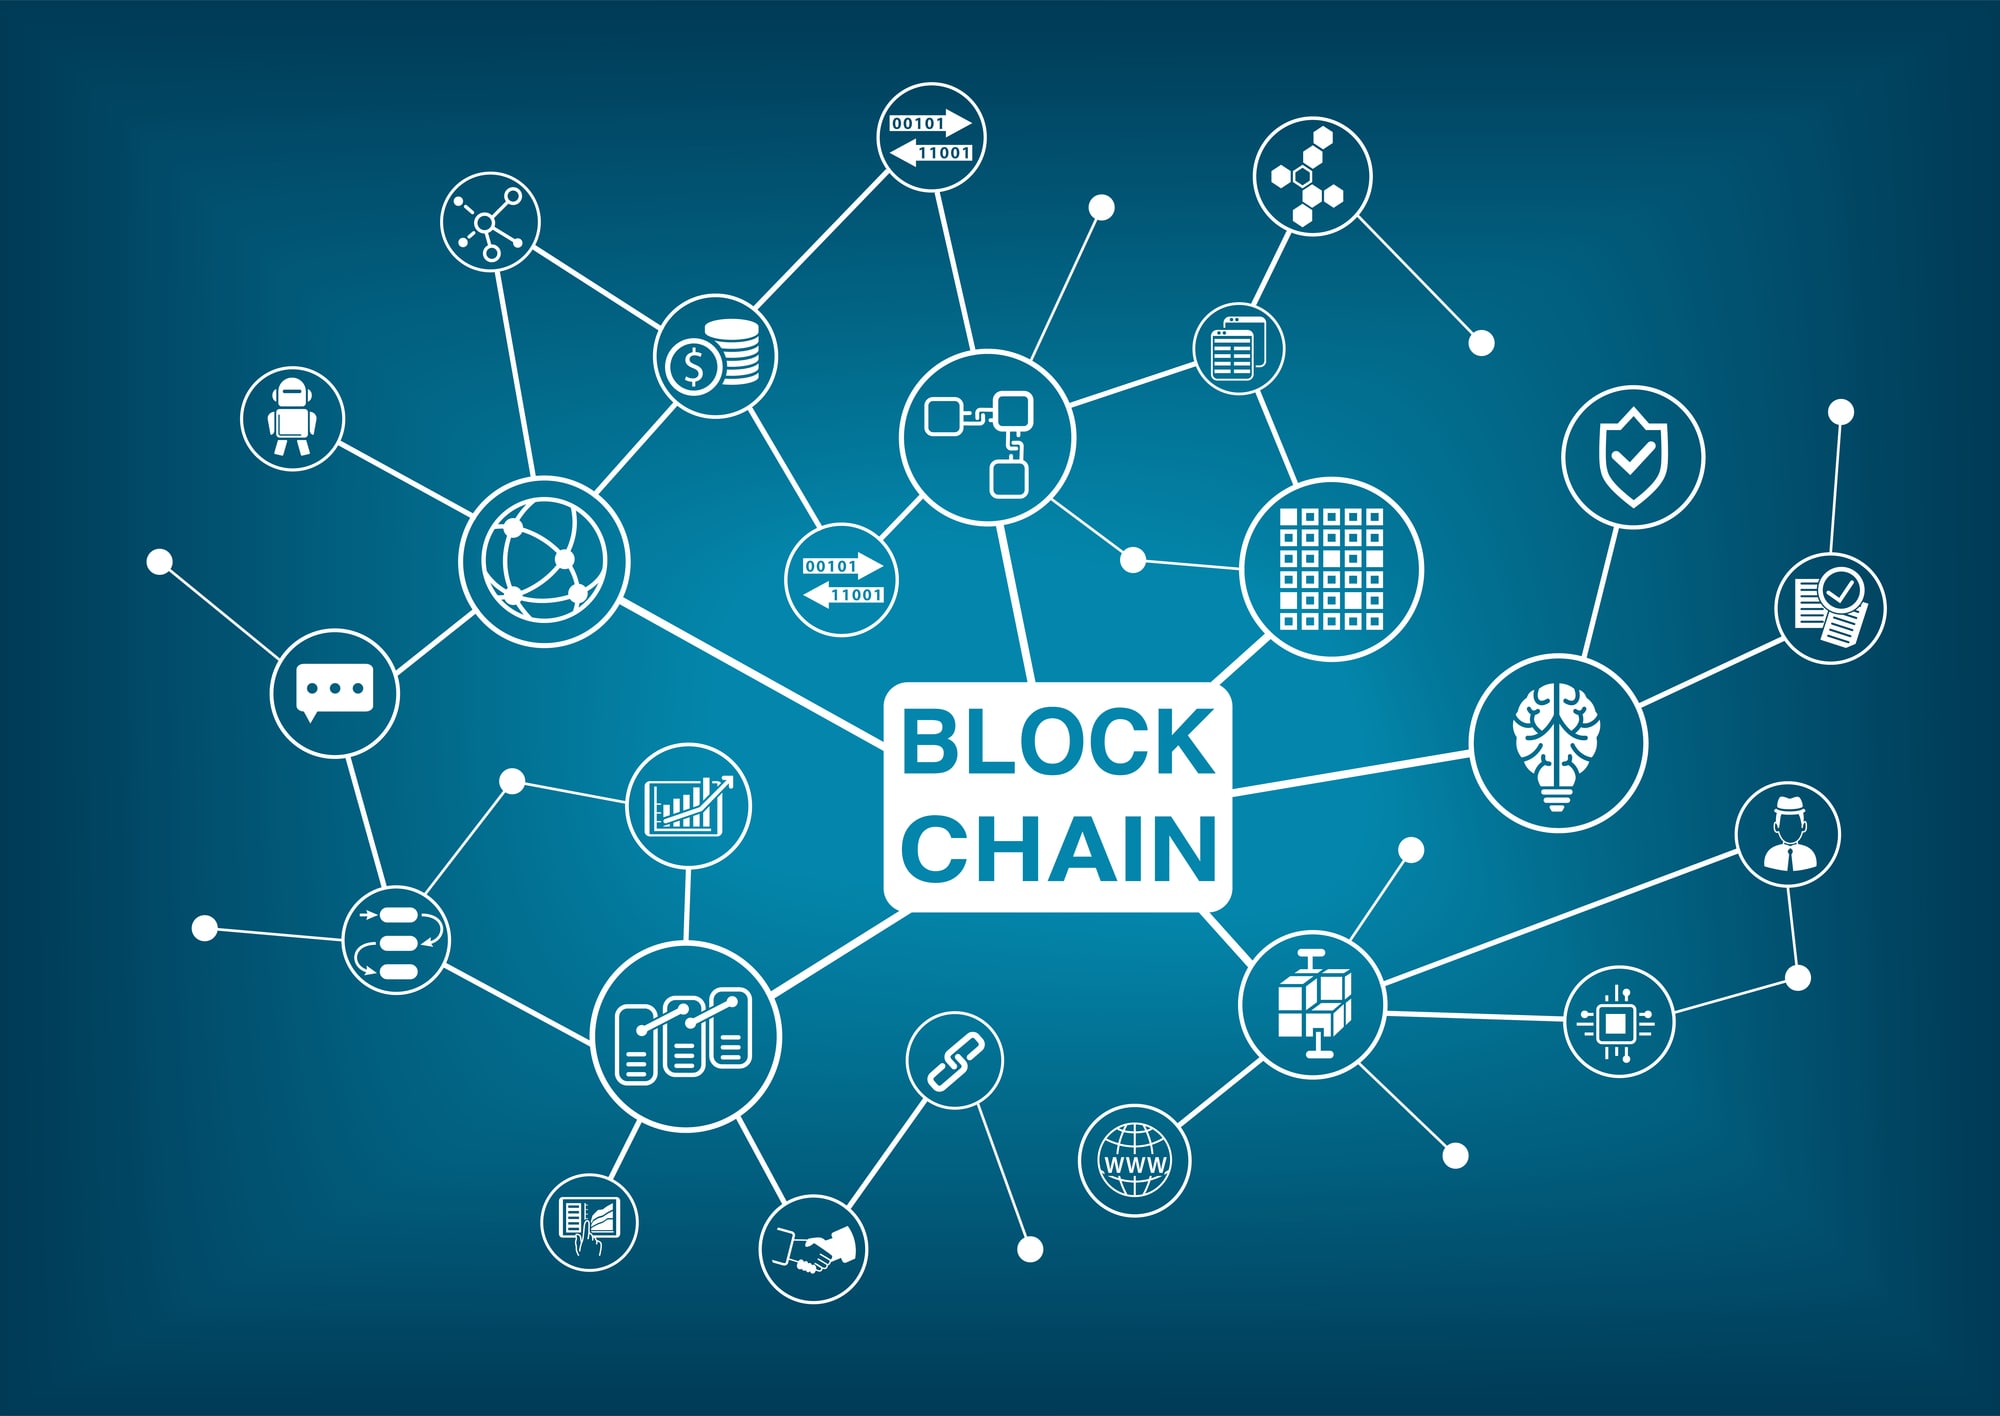 What is Blockchain, and what does it have to do with crypto?